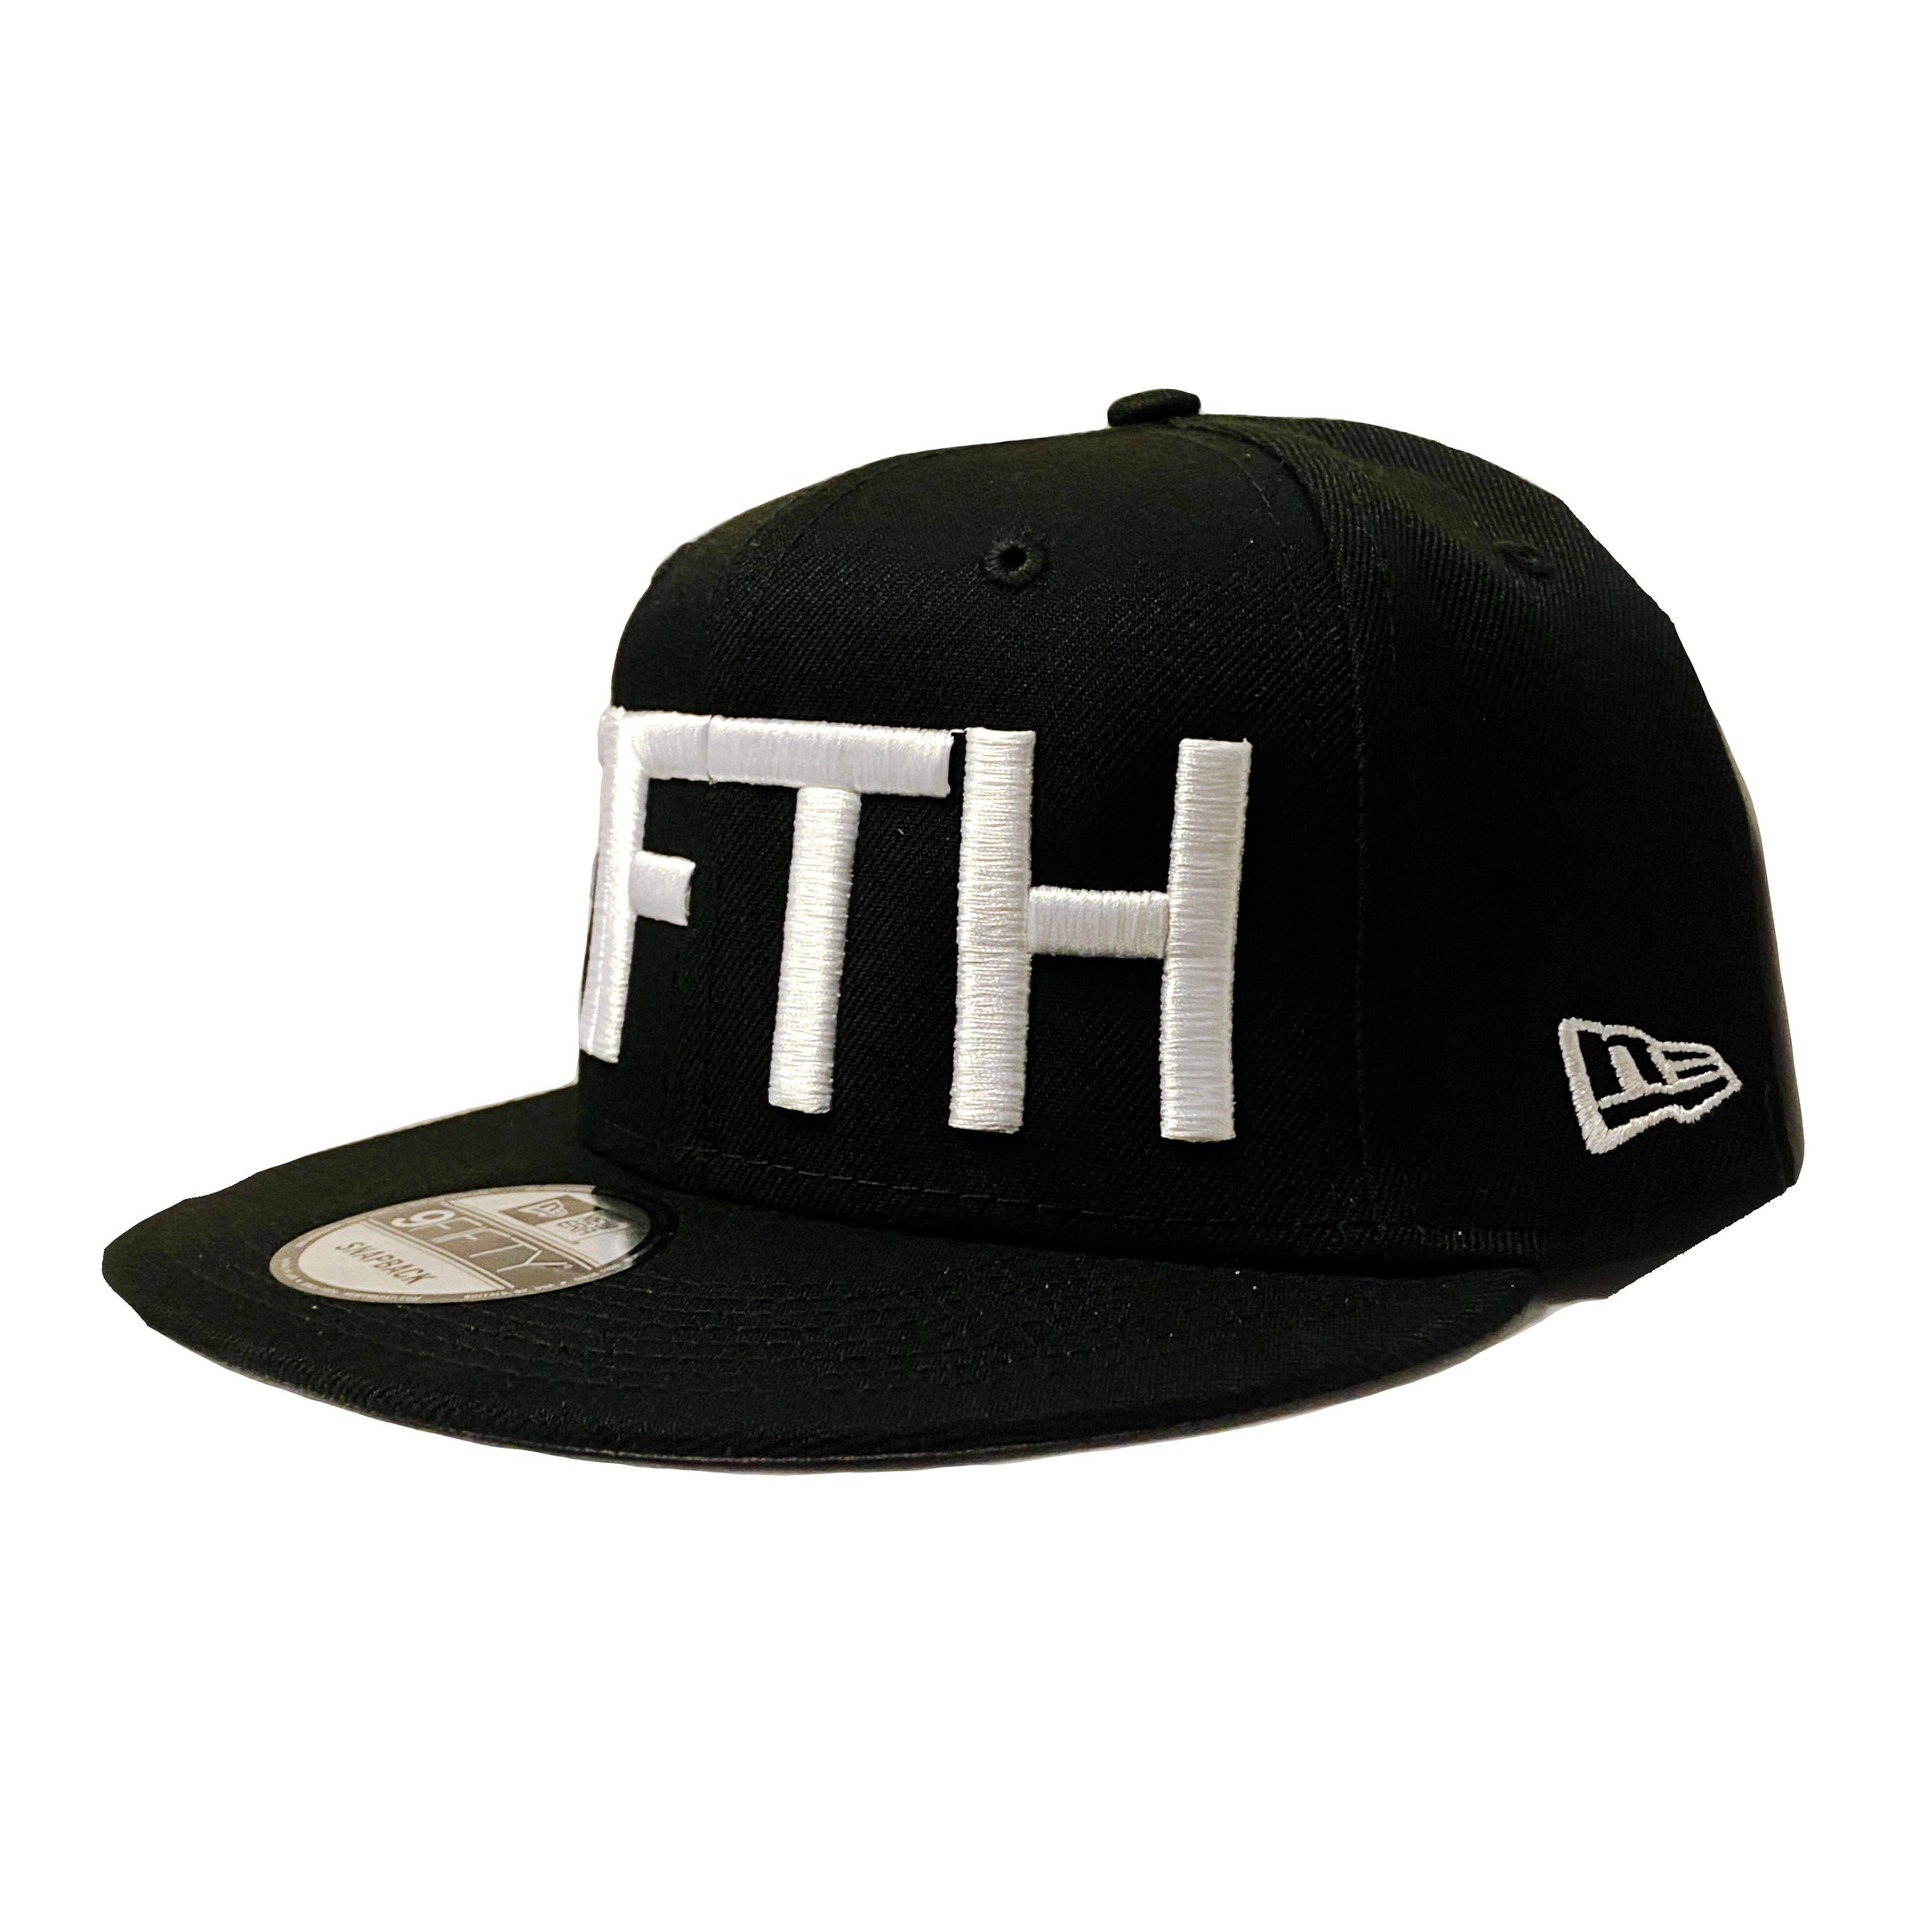 FIFTH Hat